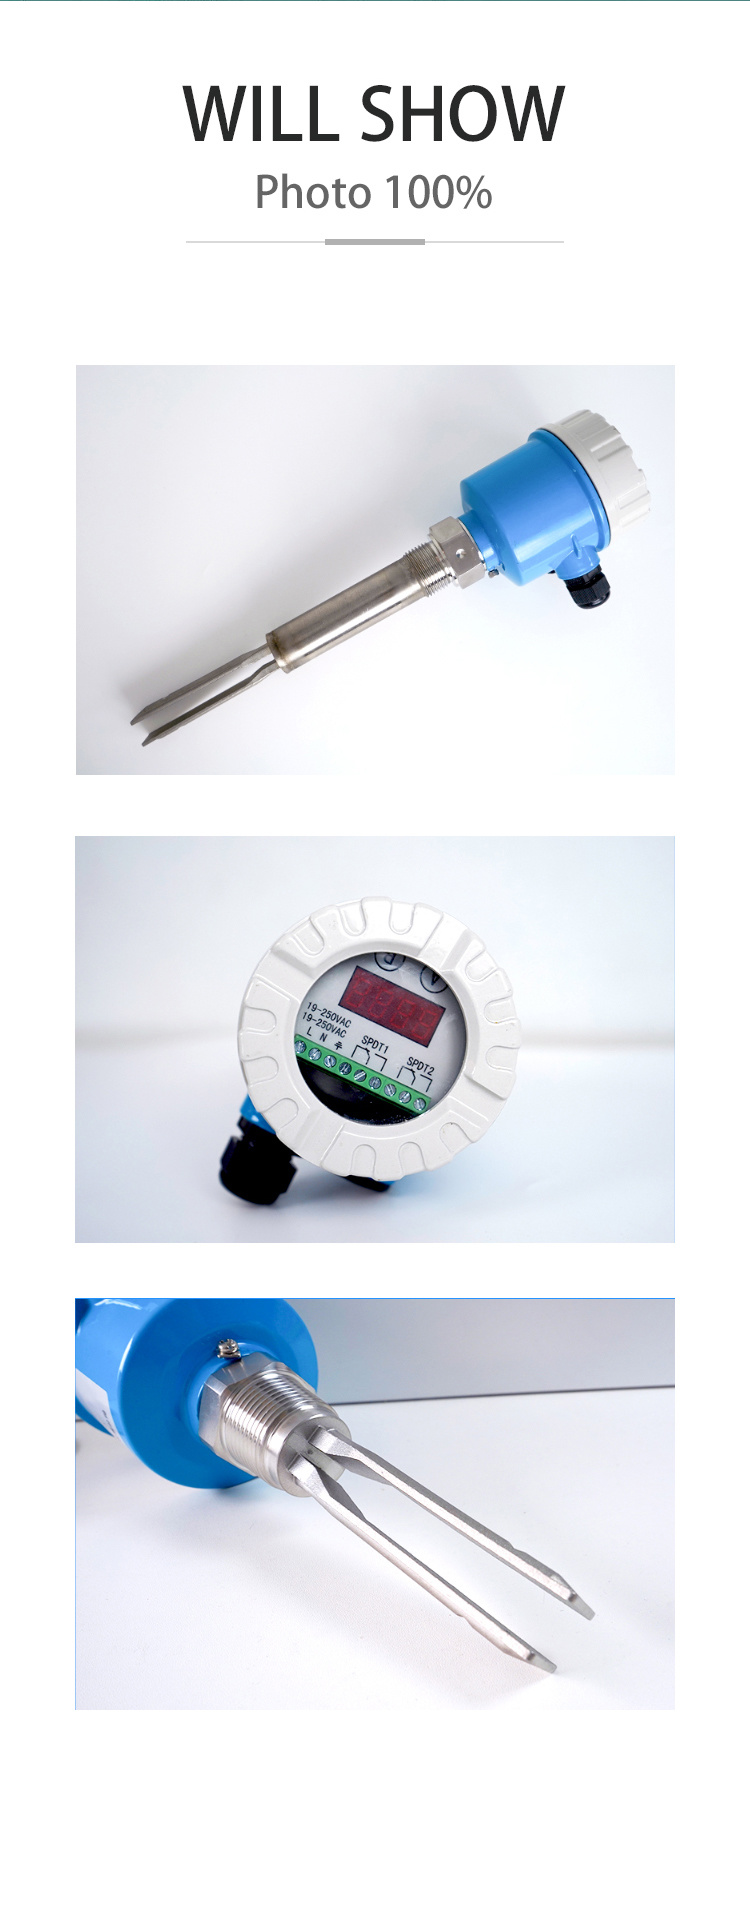 Electric Float Tap Water, Mineral Water Pulp, Glue, Dye Tuning Fork Switch Vibrating Rod Level Switch